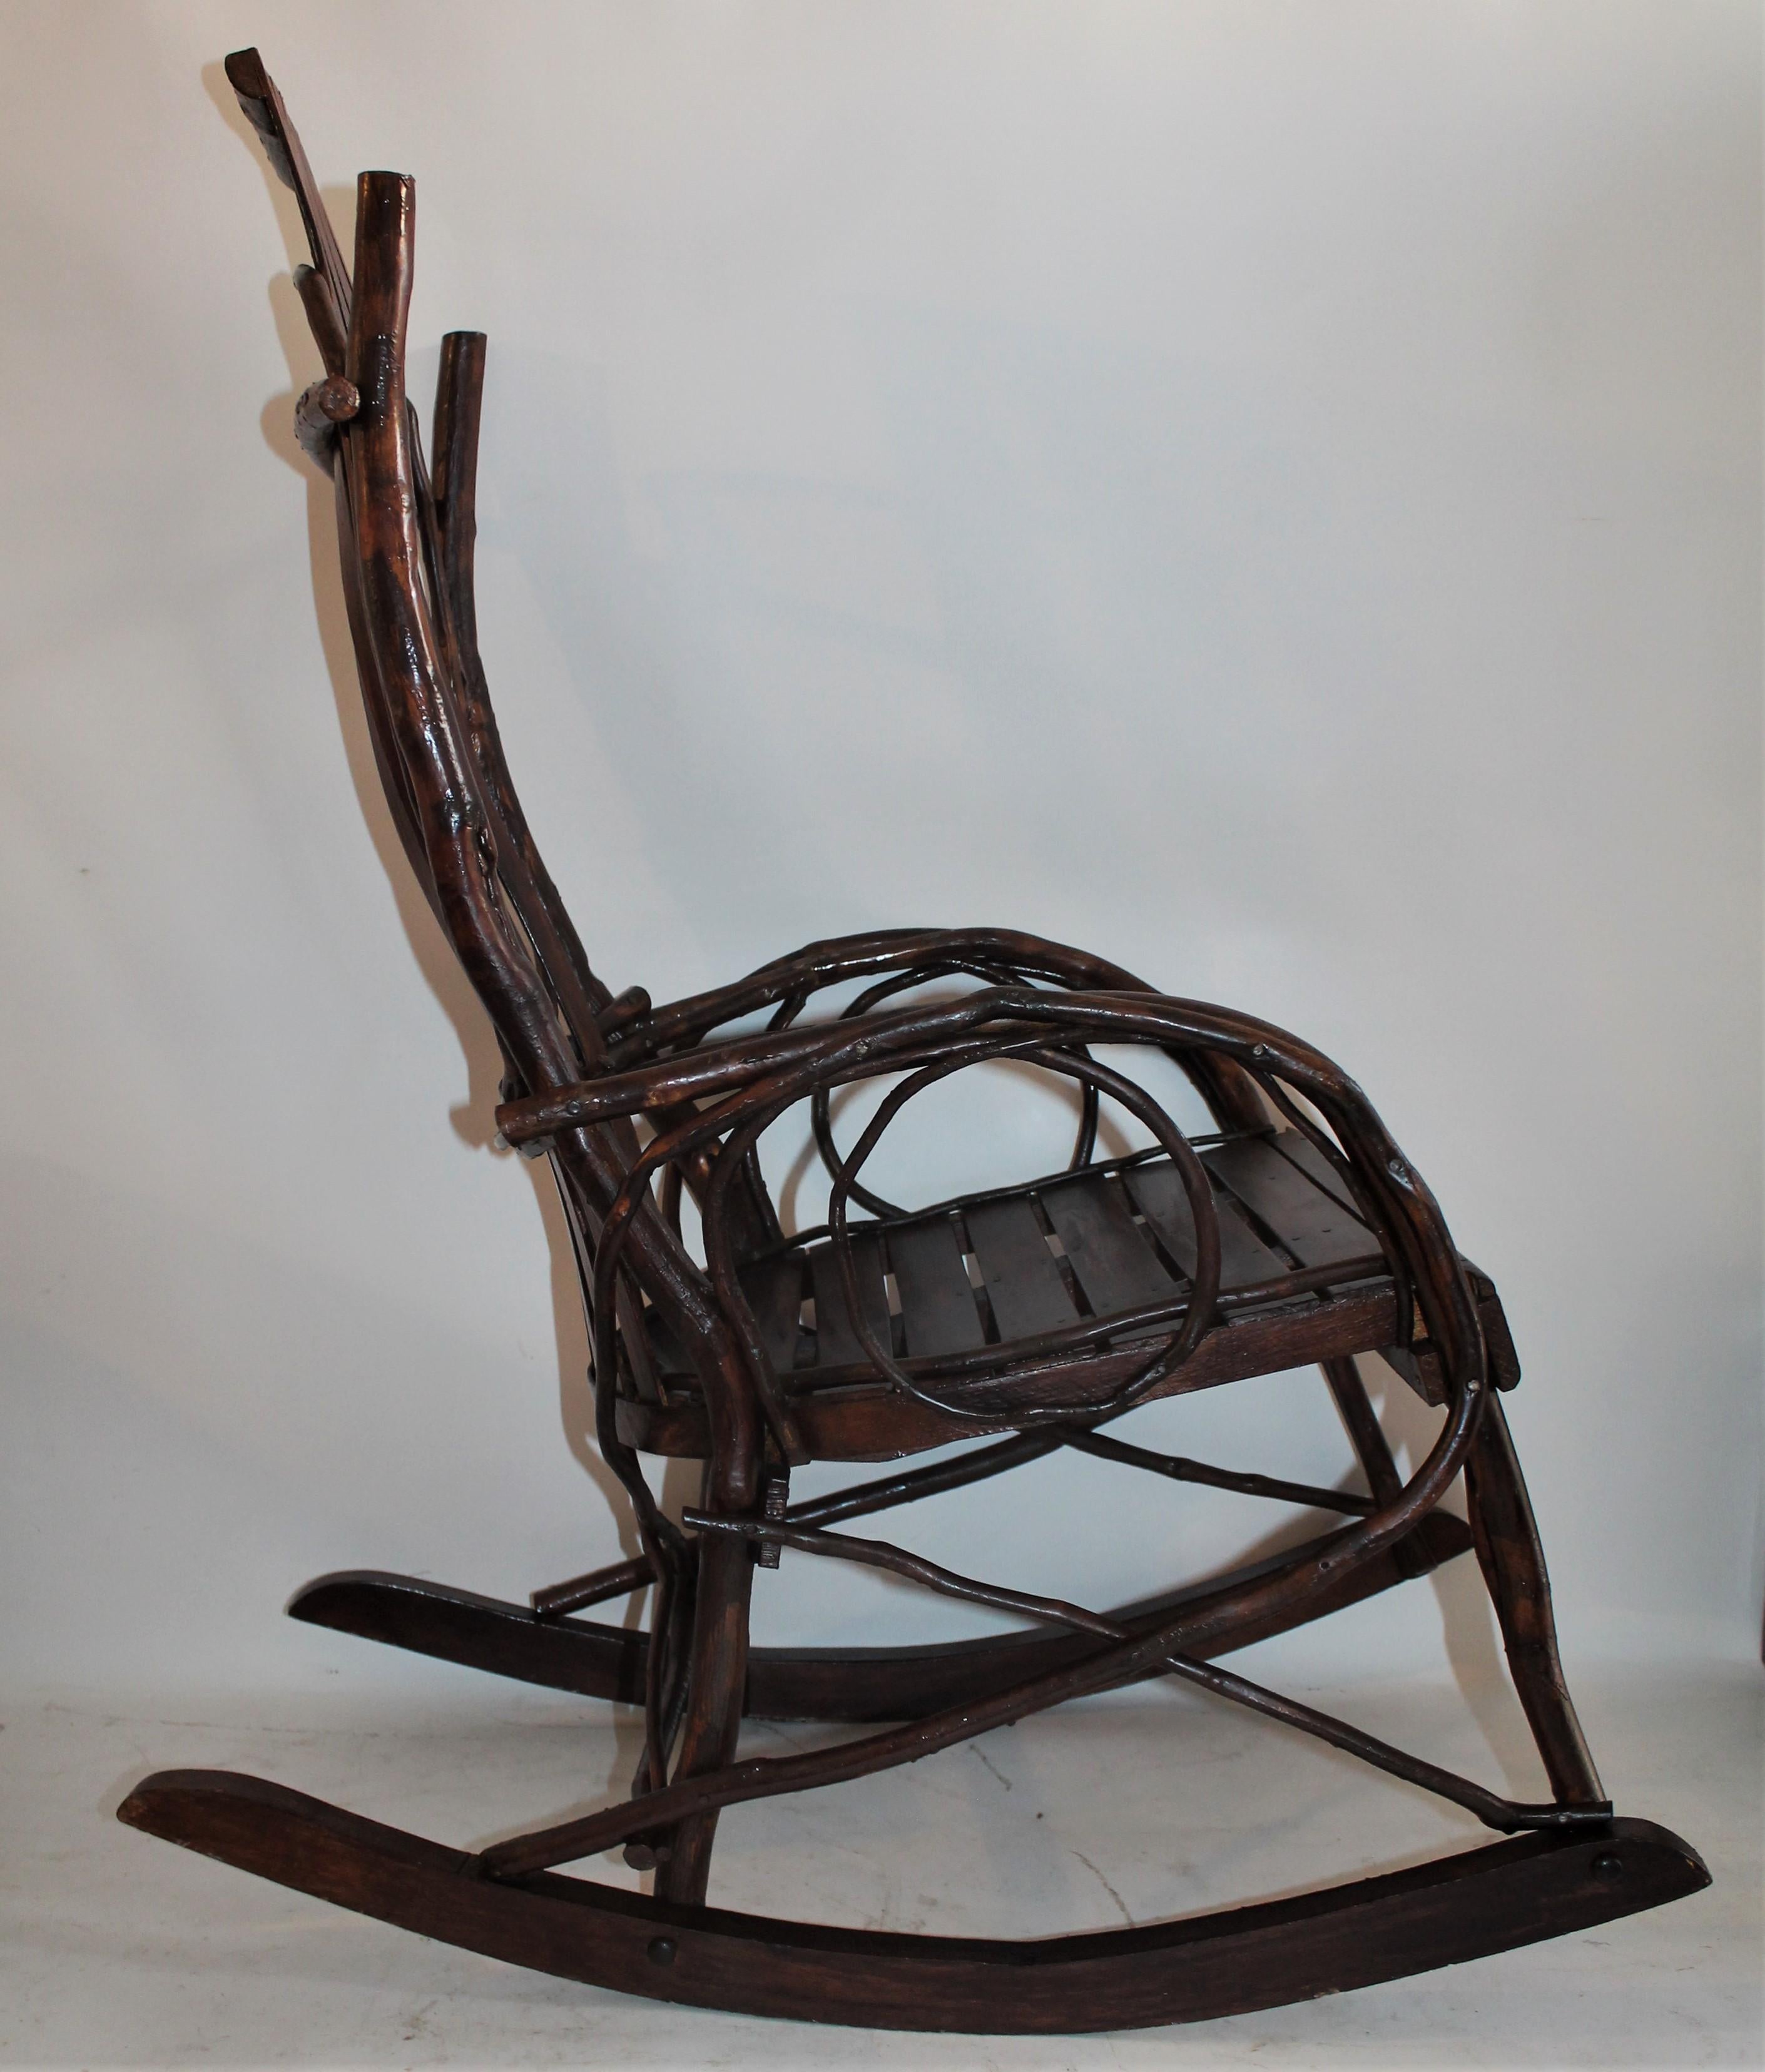 Hand-Crafted Amish Bent Wood Rocking Chairs, Adults and Child's, 2